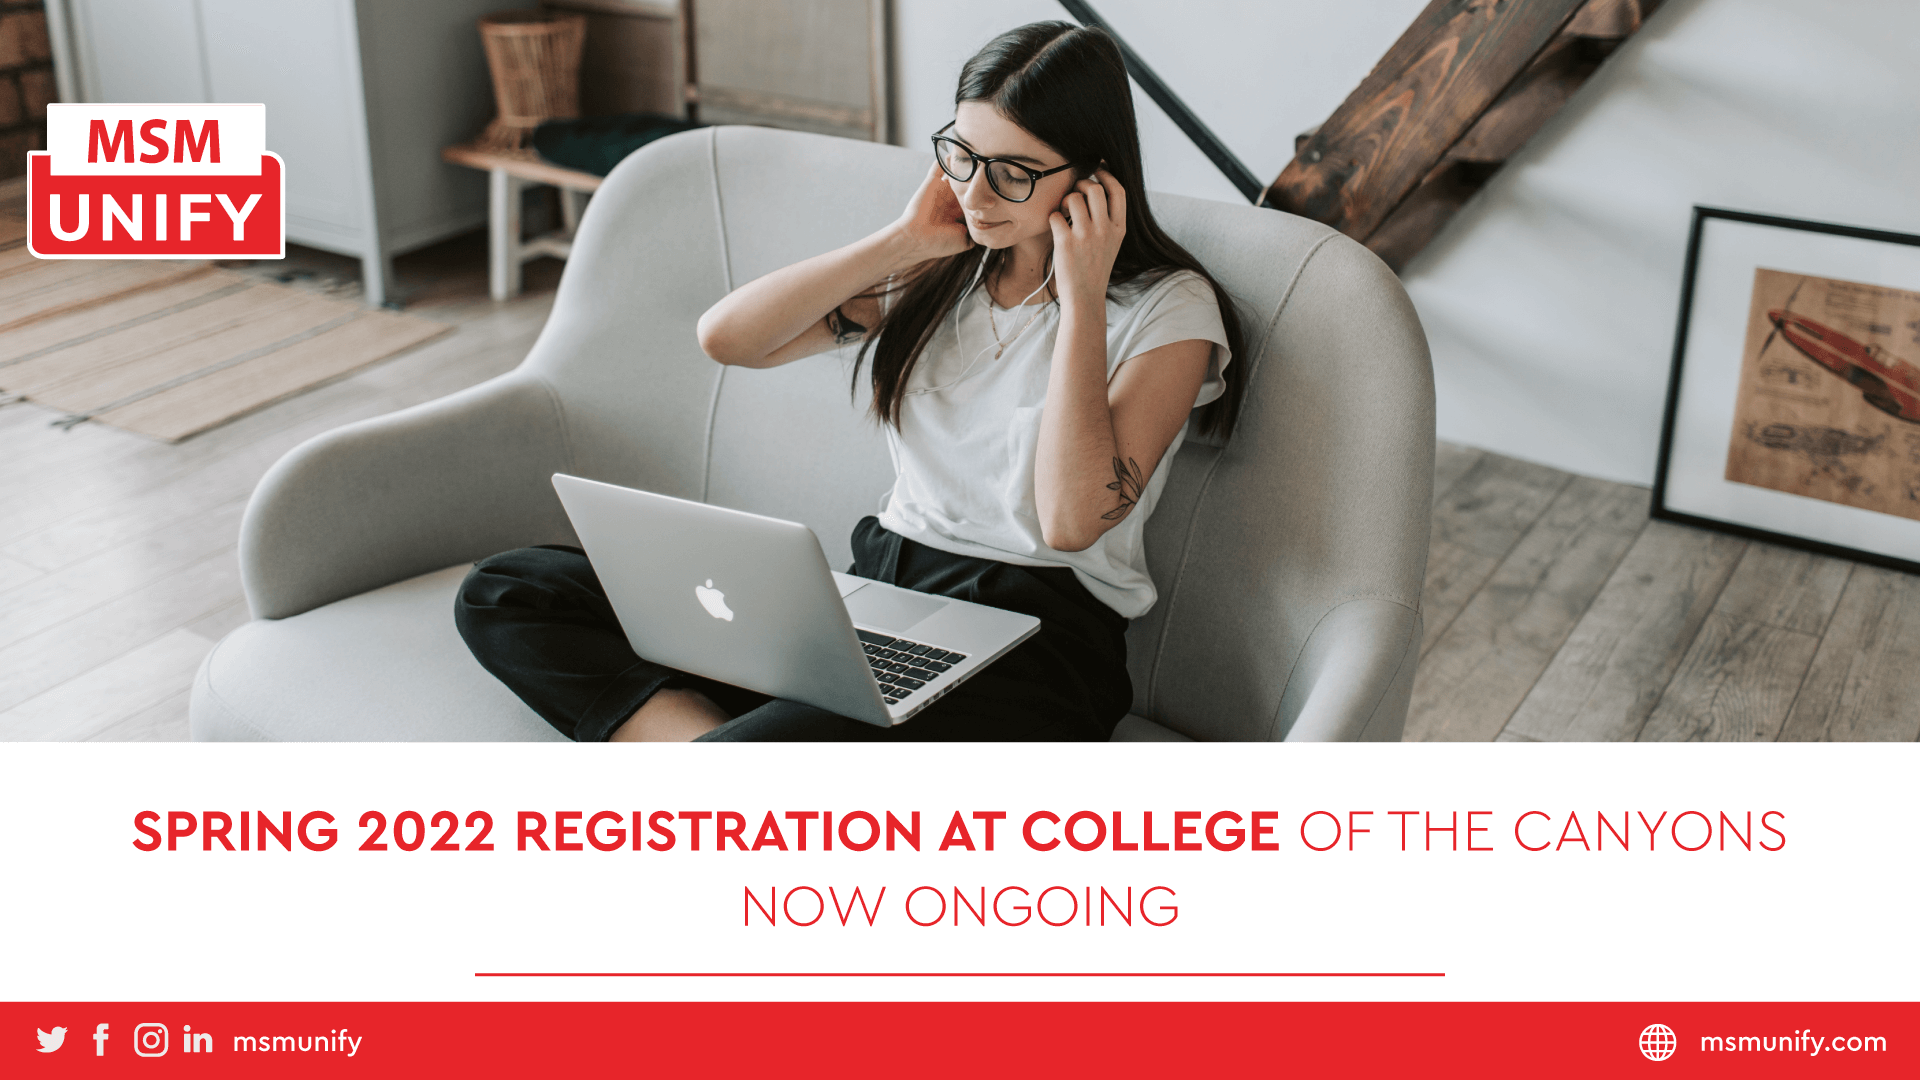 Spring 2022 Registration at College of the Canyons Now Ongoing